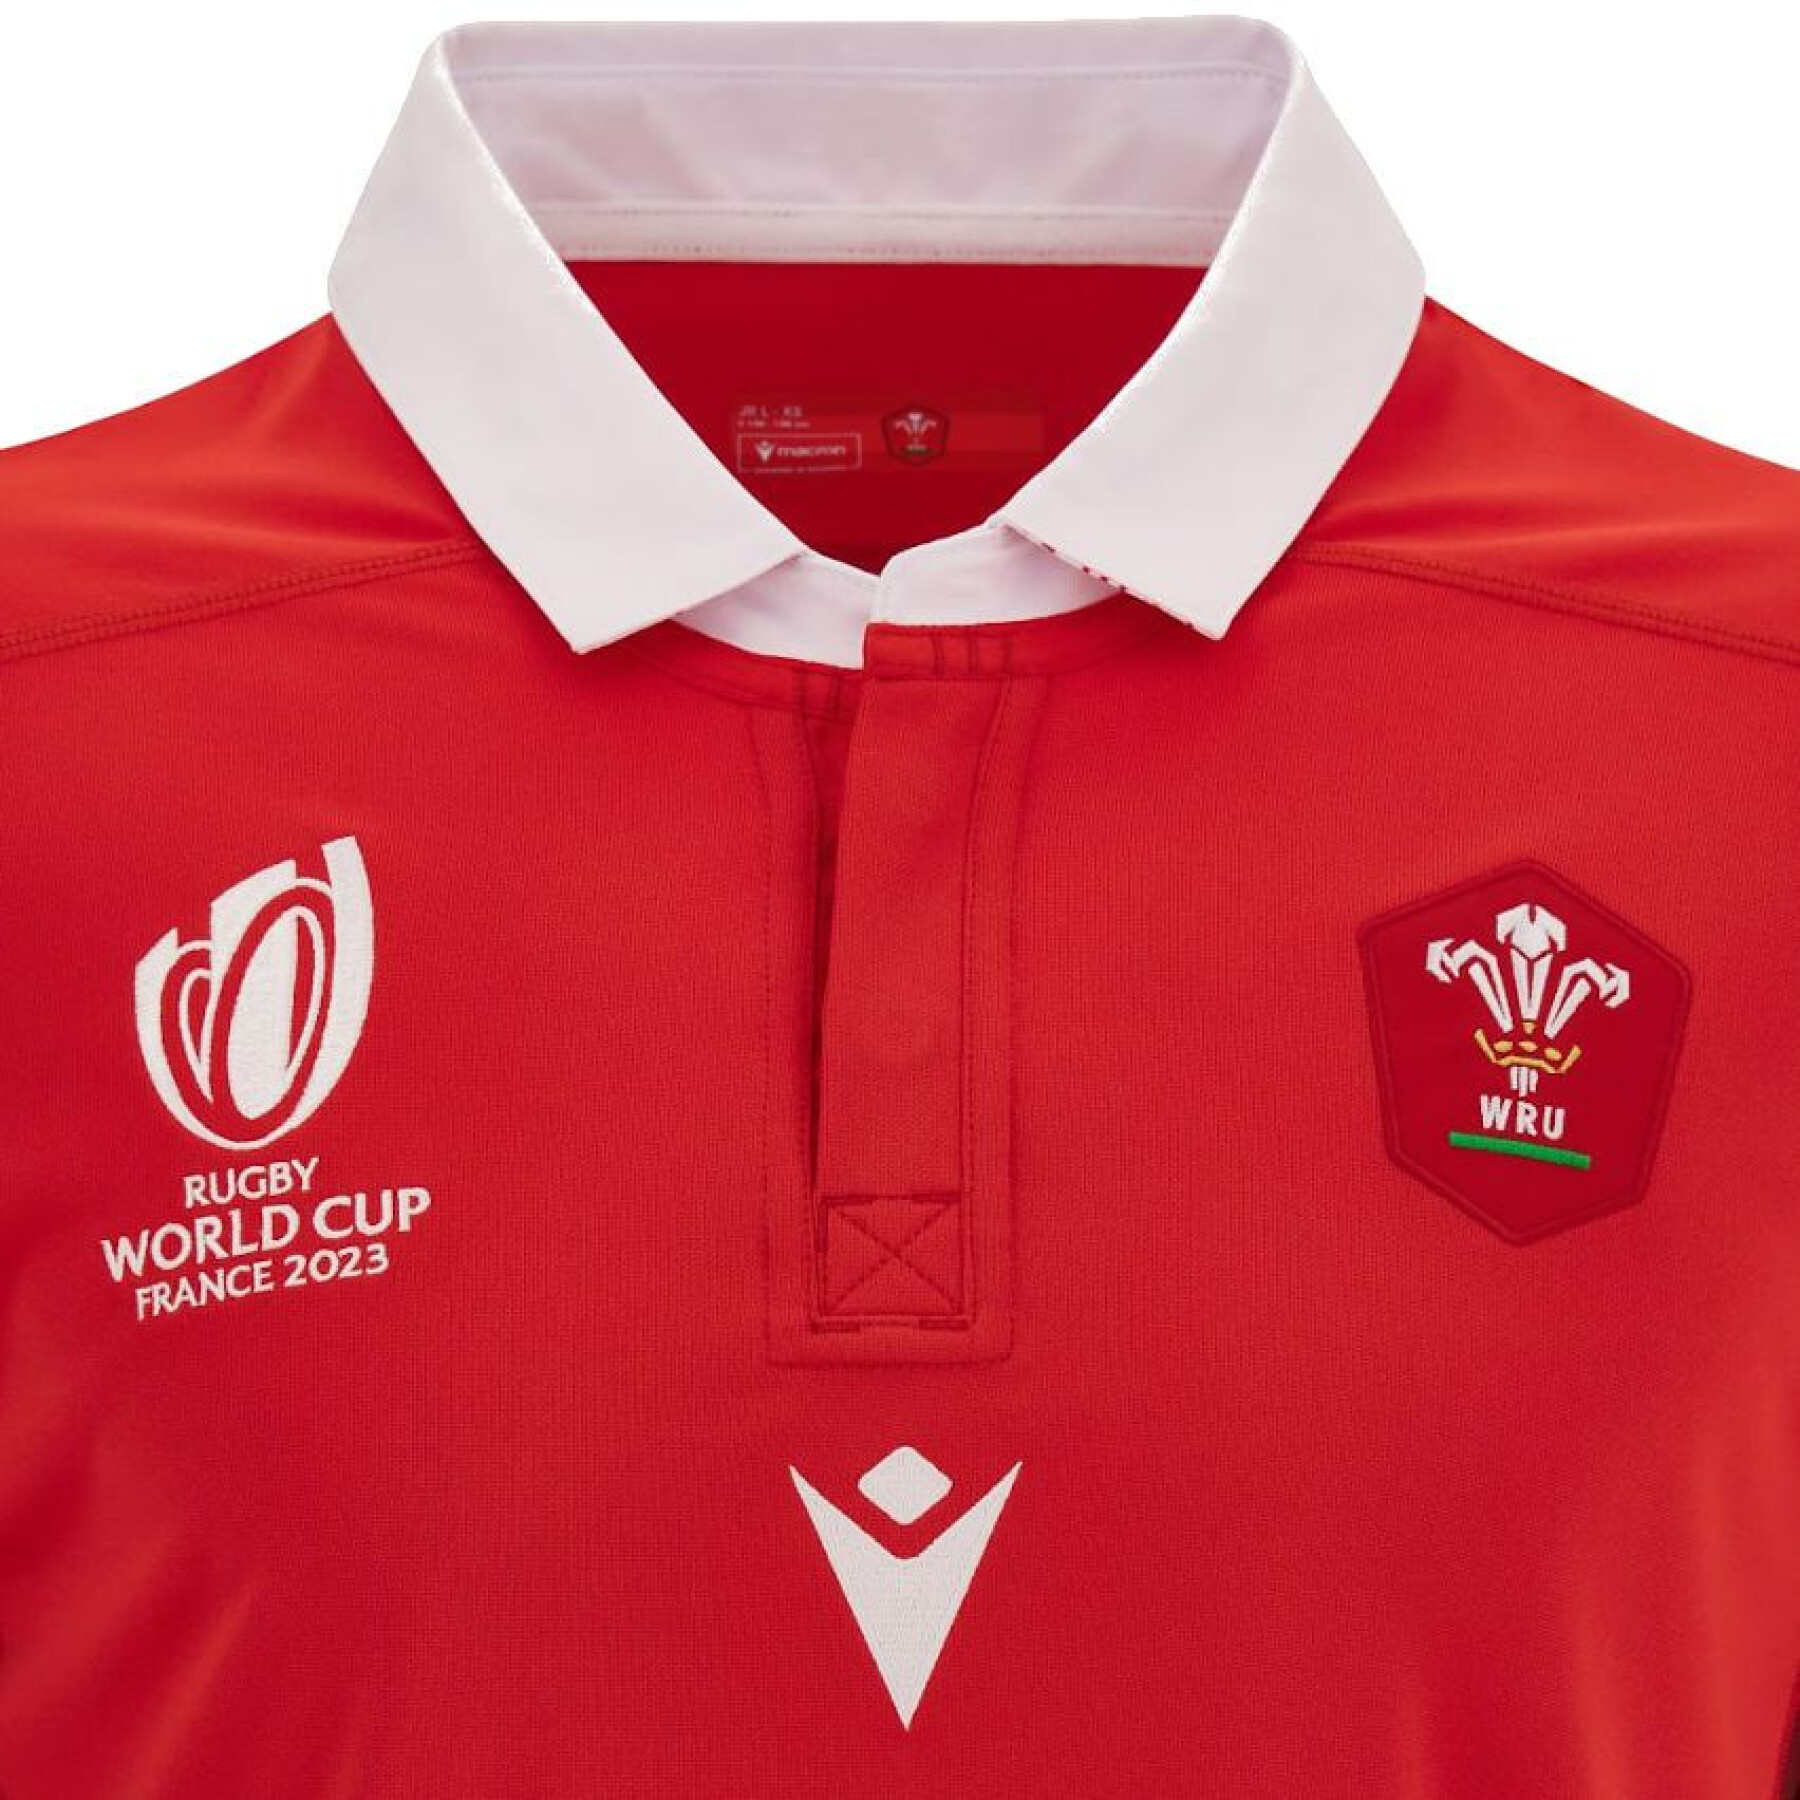 Rugby World Cup 2023 children's home jersey Wales